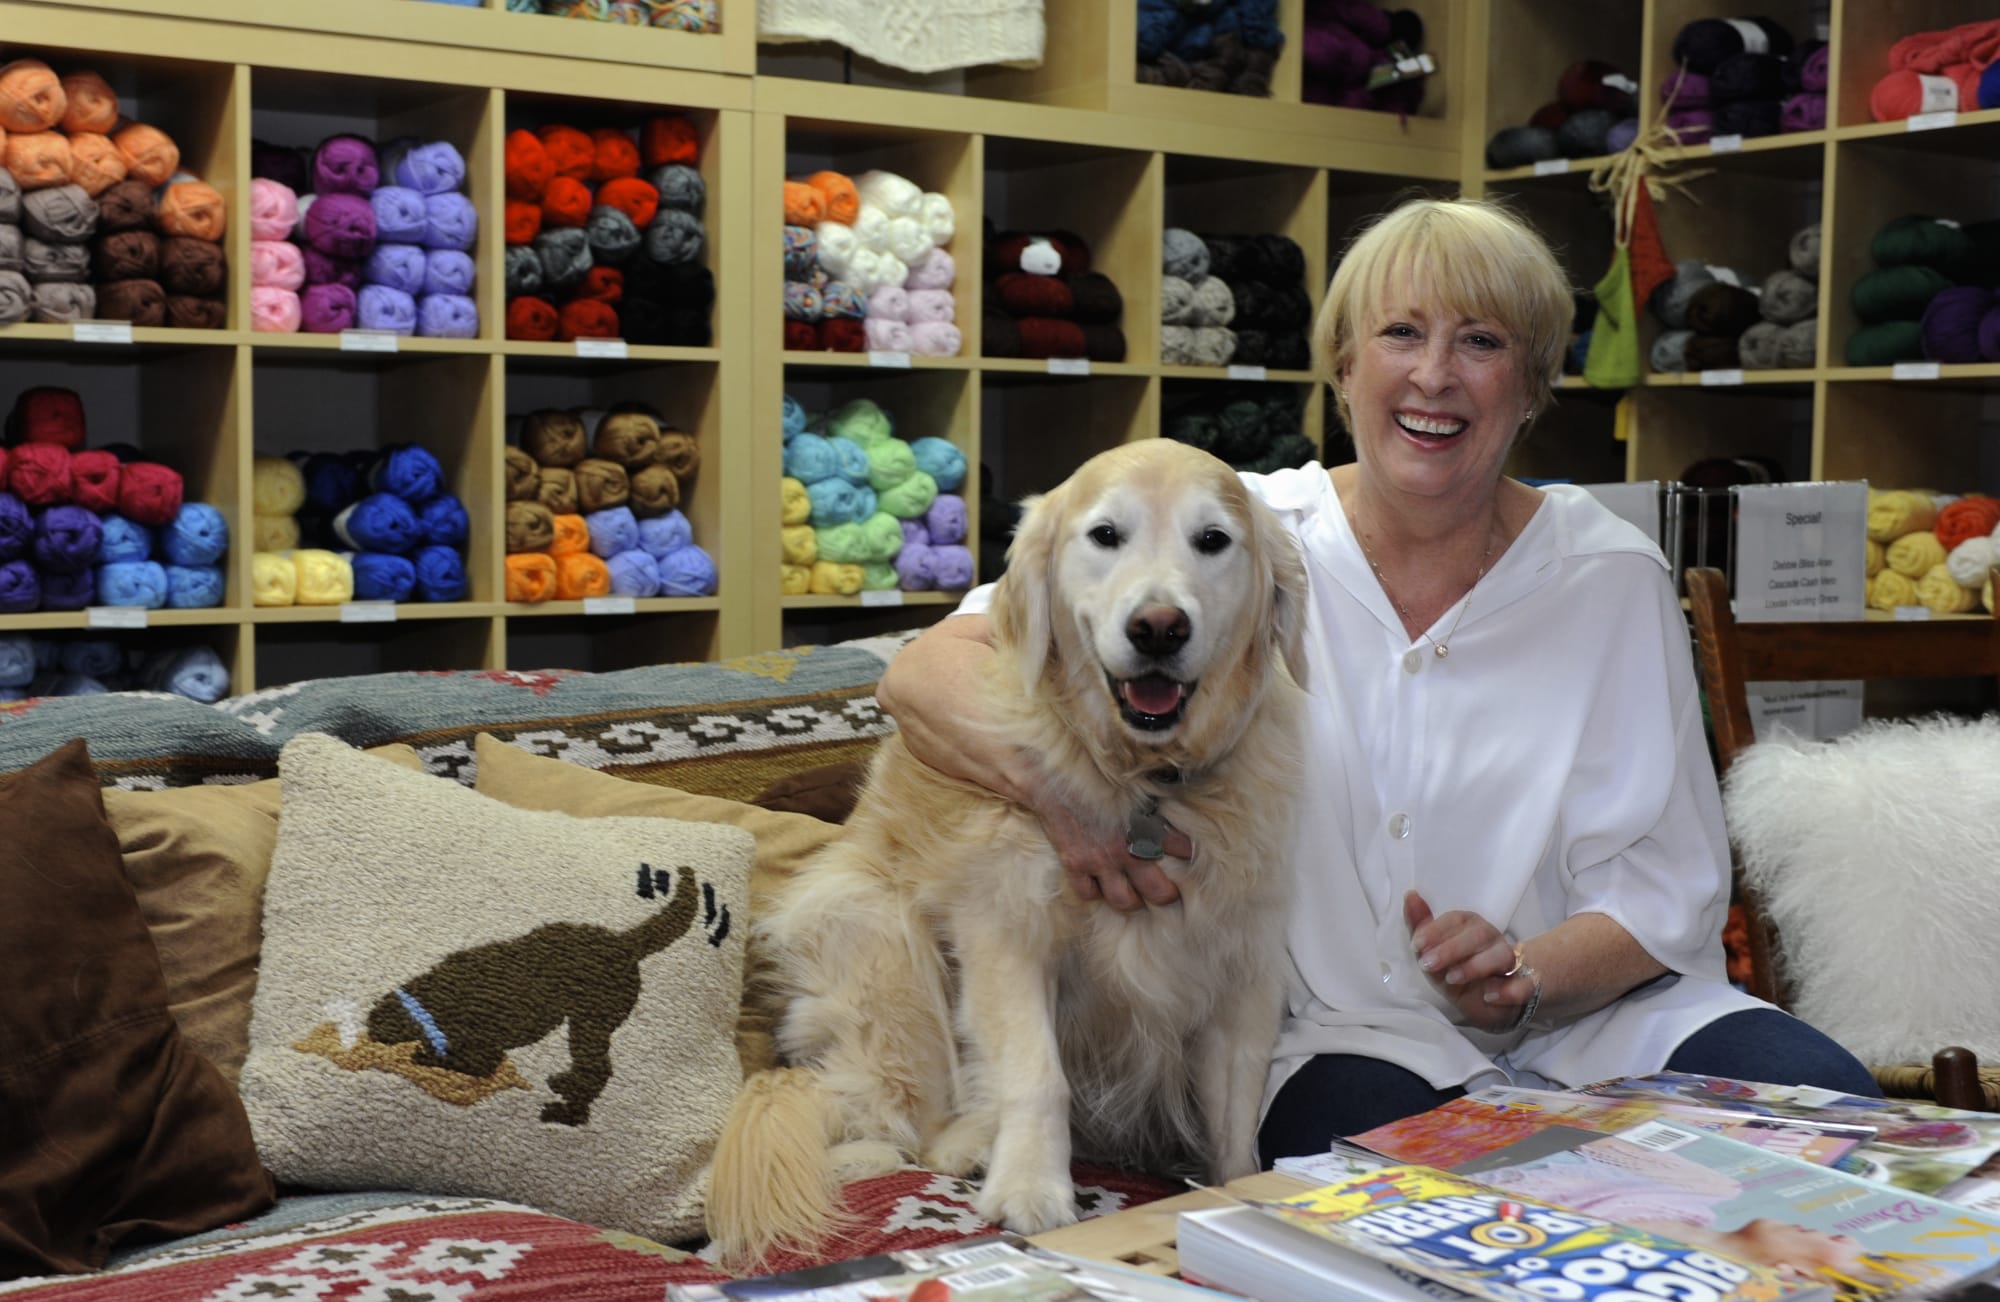 Jennifer Powell, with her dog, Bentley, at her store Wooly Wooly Wag Tails Yarn in Washougal.